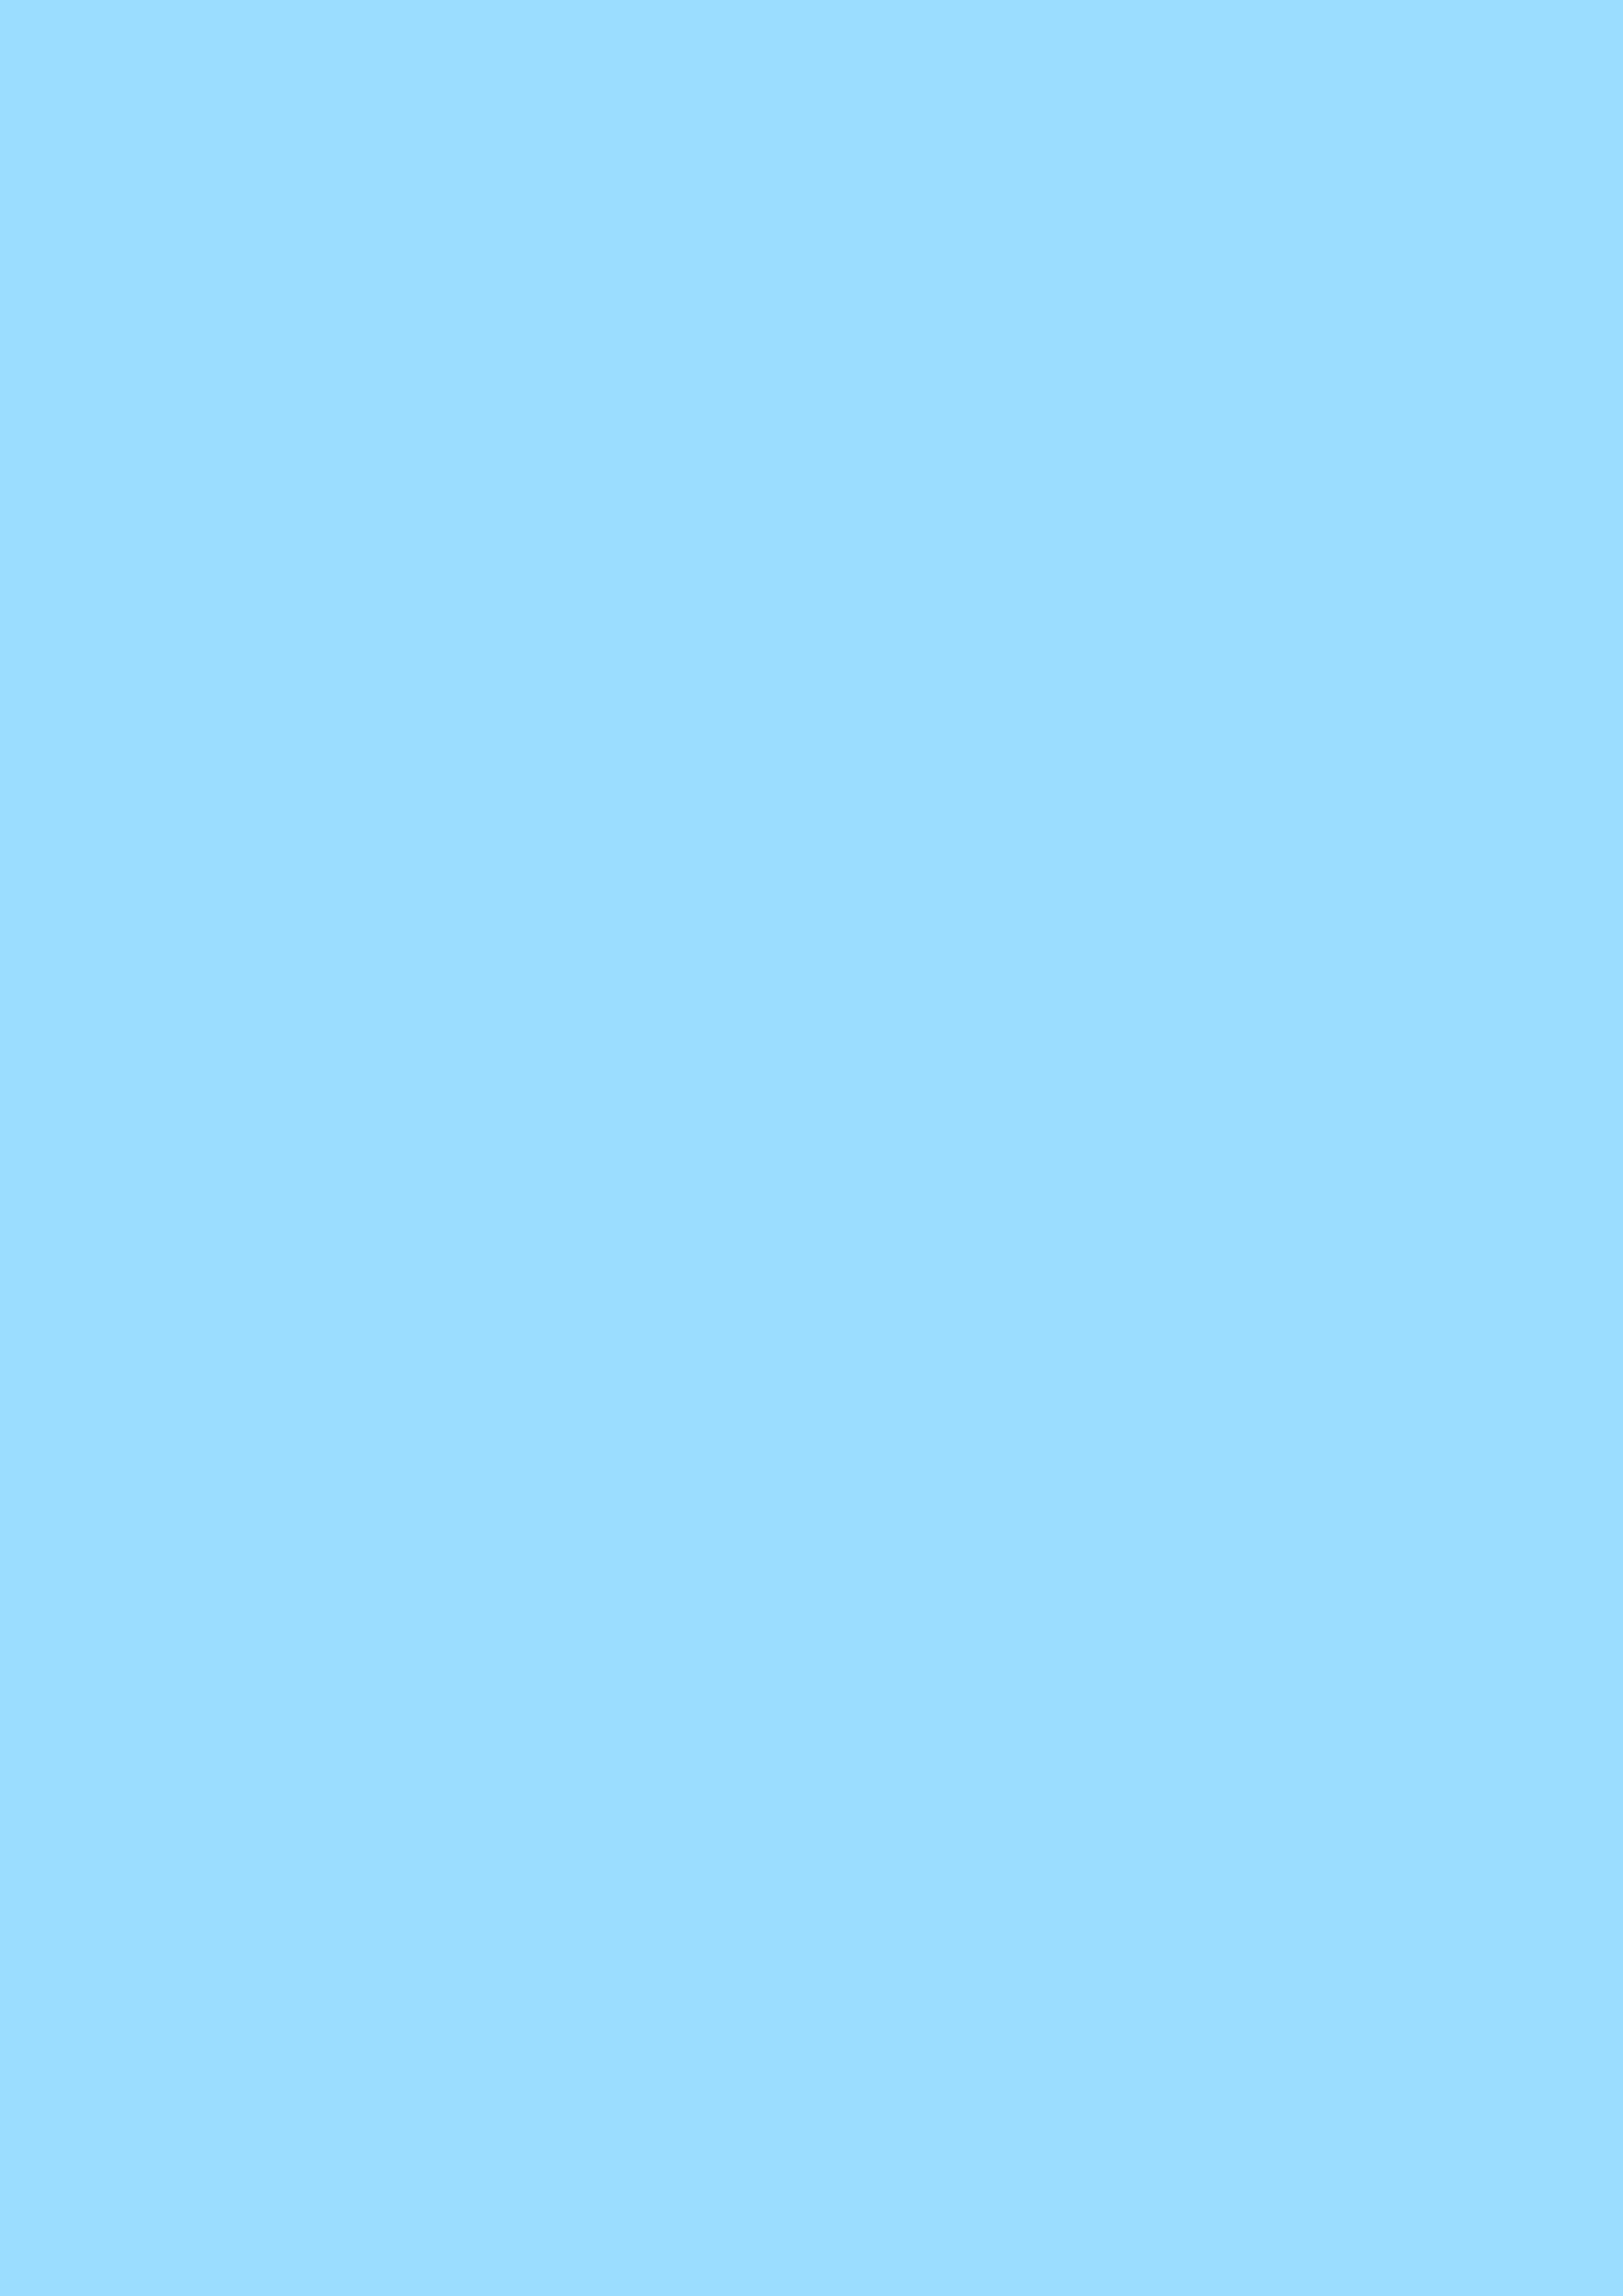 2480x3508 Columbia Blue Solid Color Background